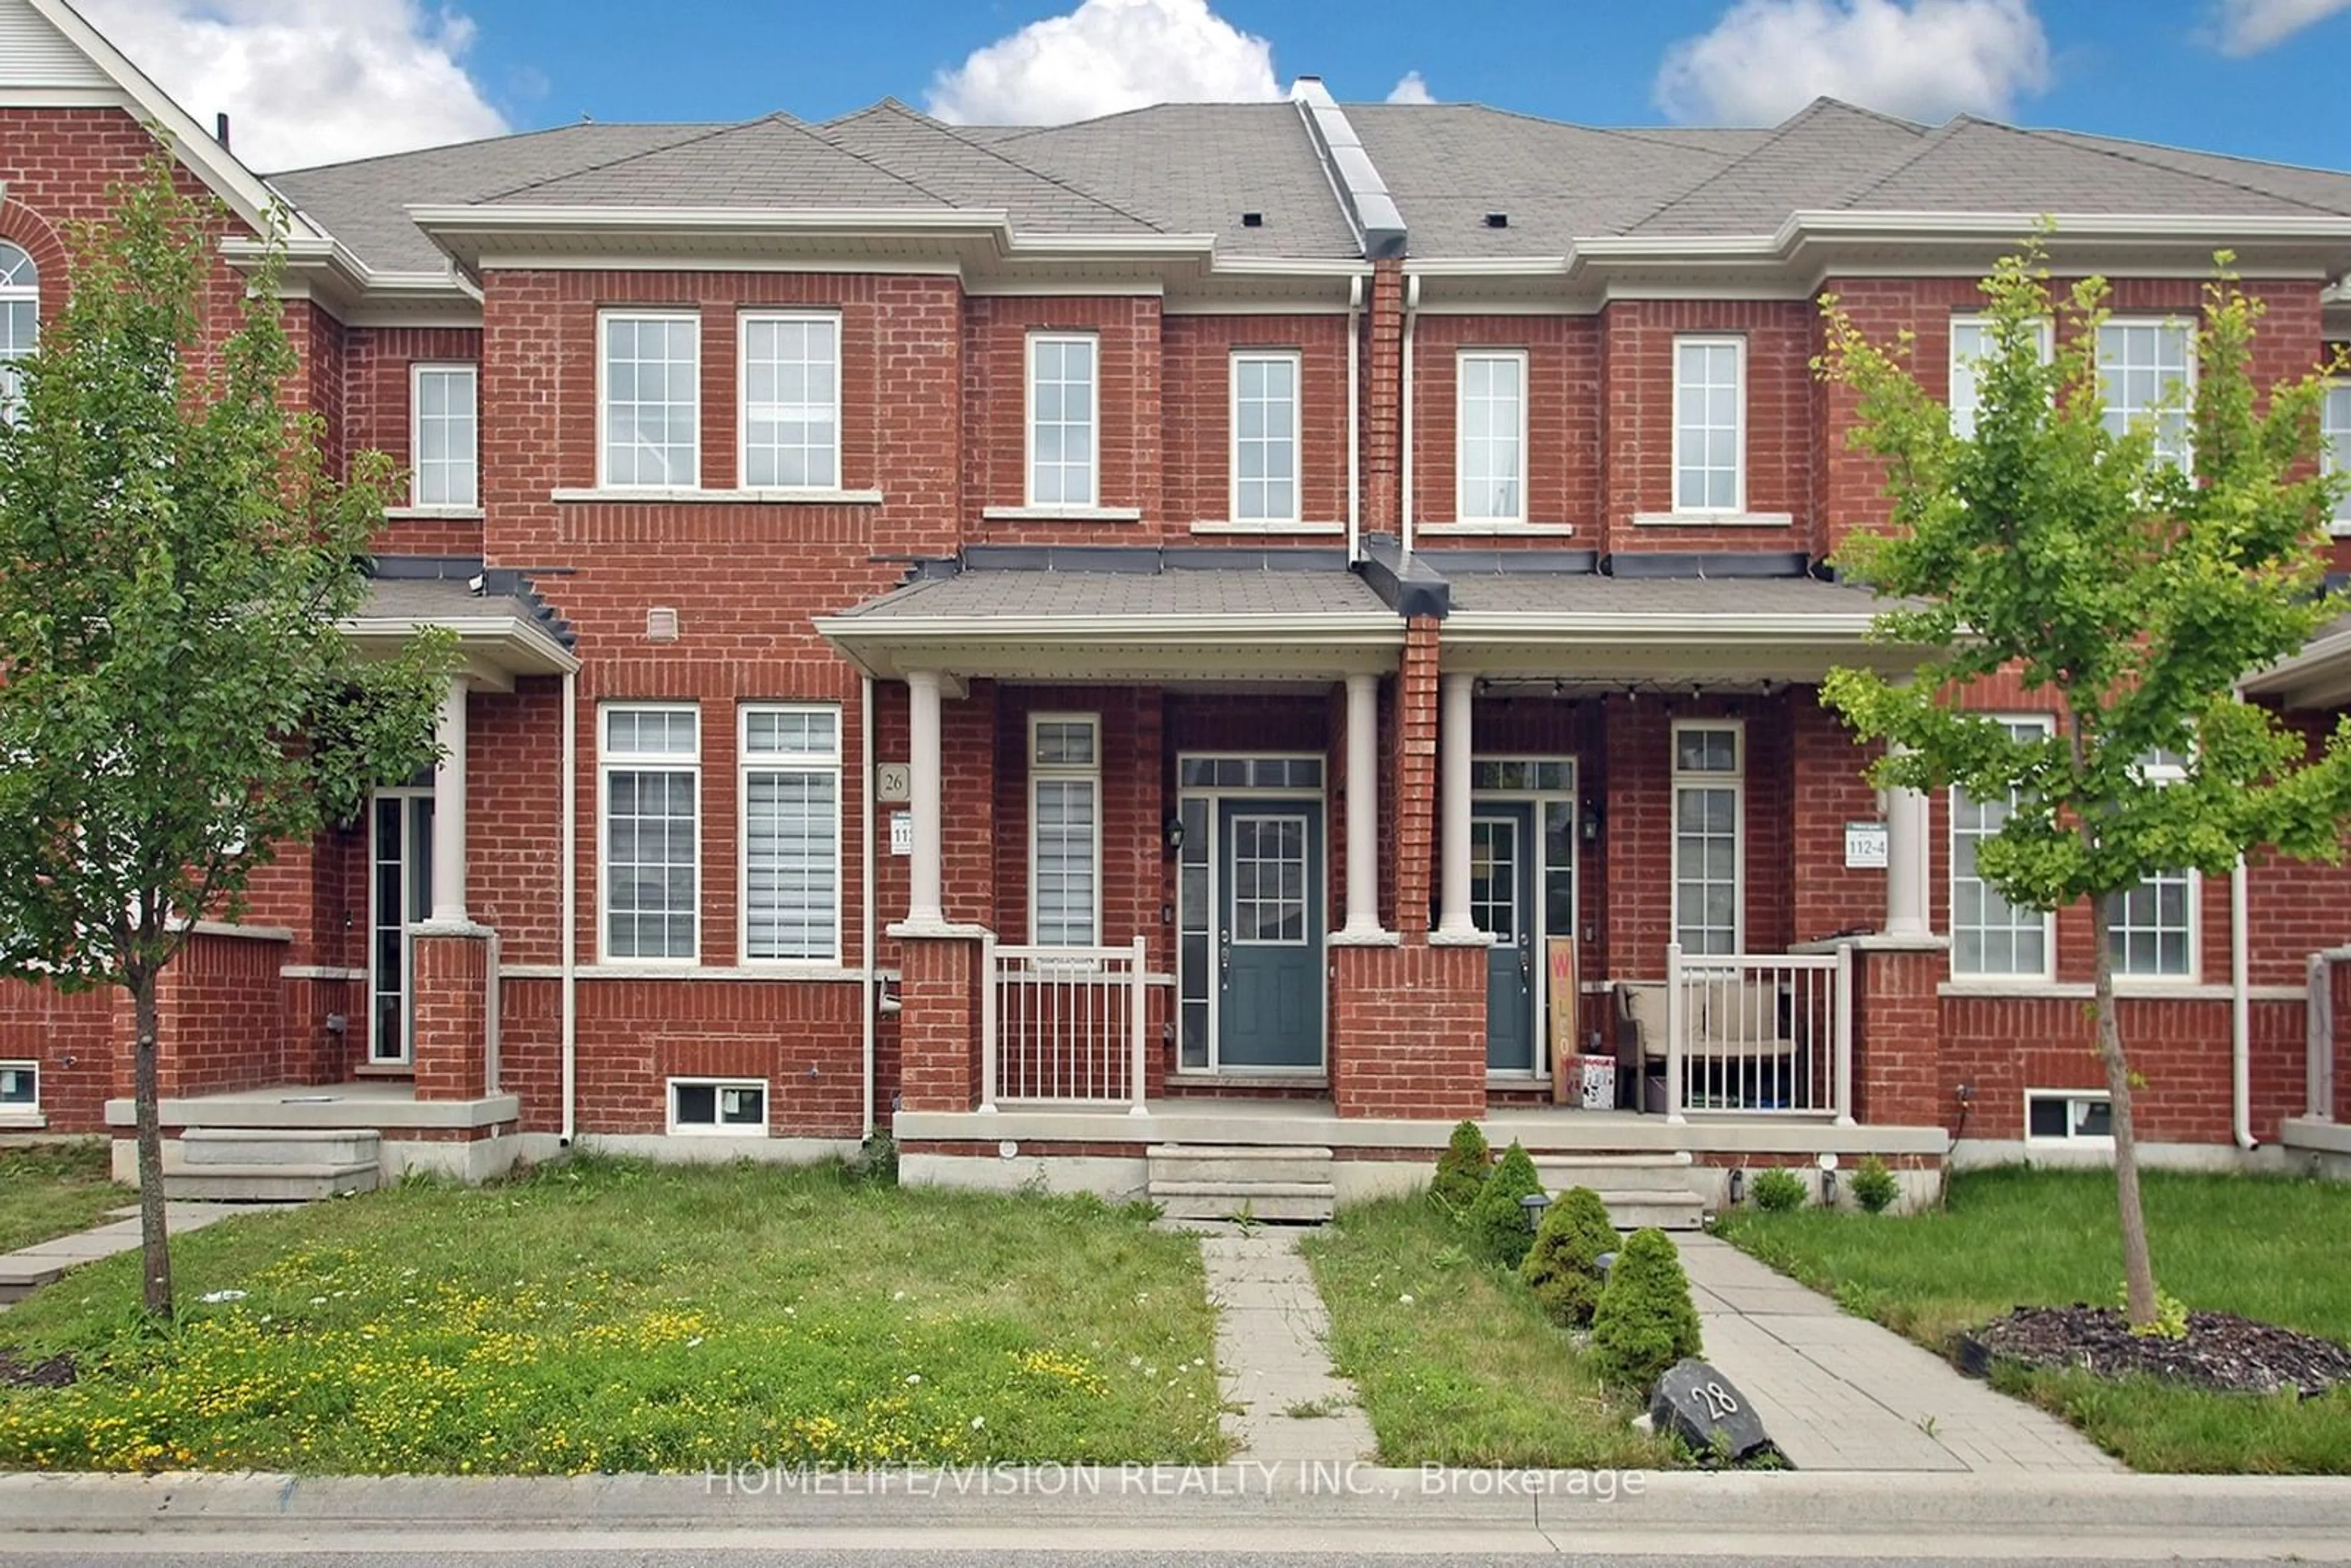 Home with brick exterior material for 26 Walter Proctor Rd, East Gwillimbury Ontario L9N 0P1